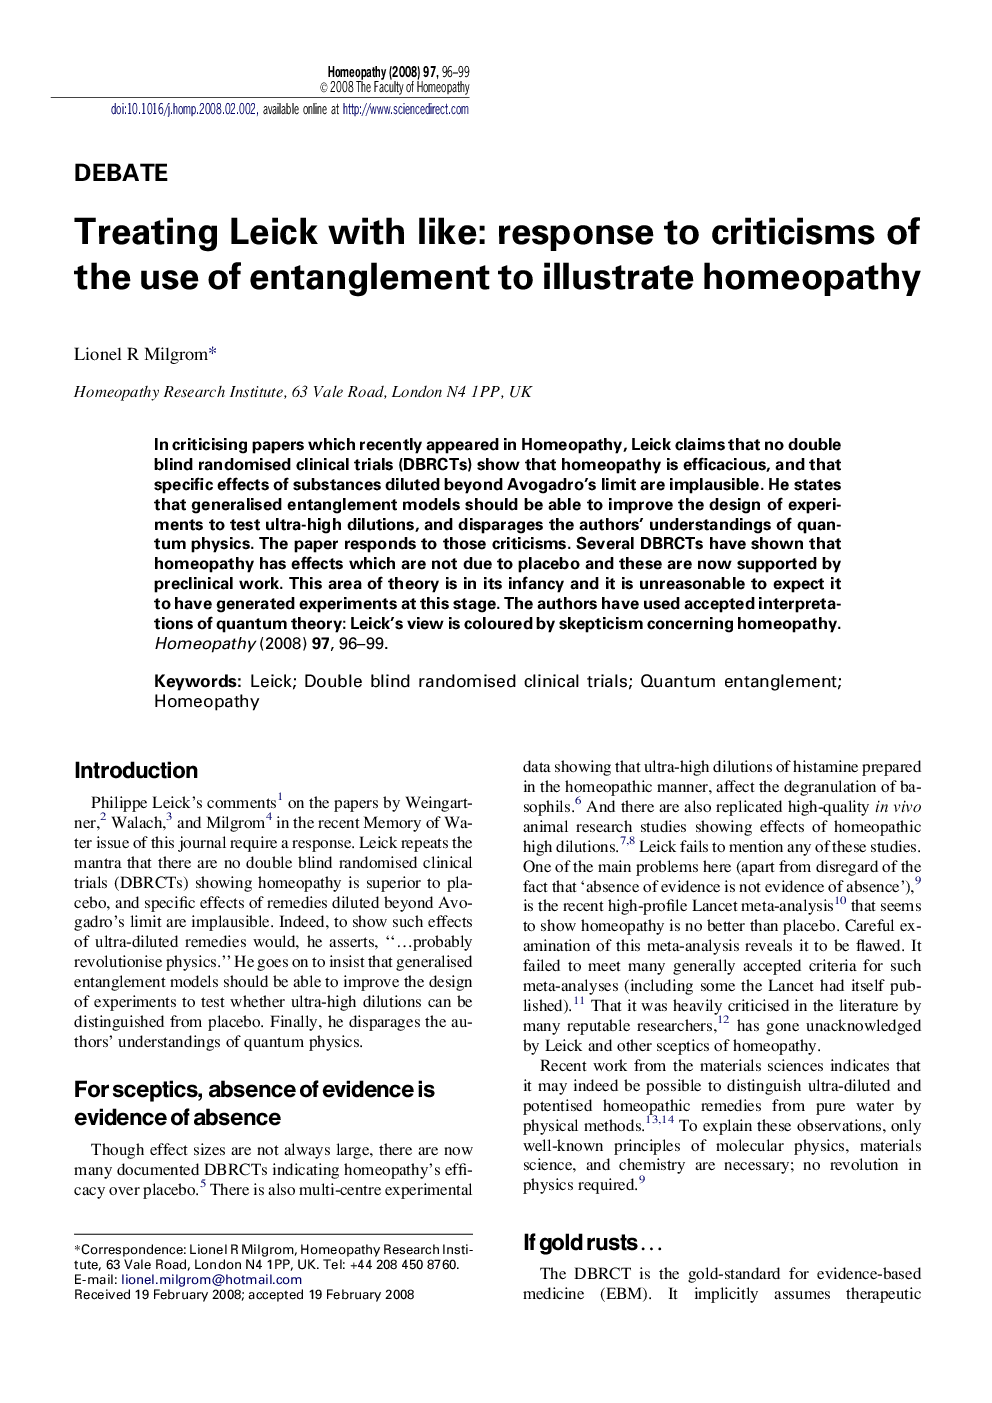 Treating Leick with like: response to criticisms of the use of entanglement to illustrate homeopathy